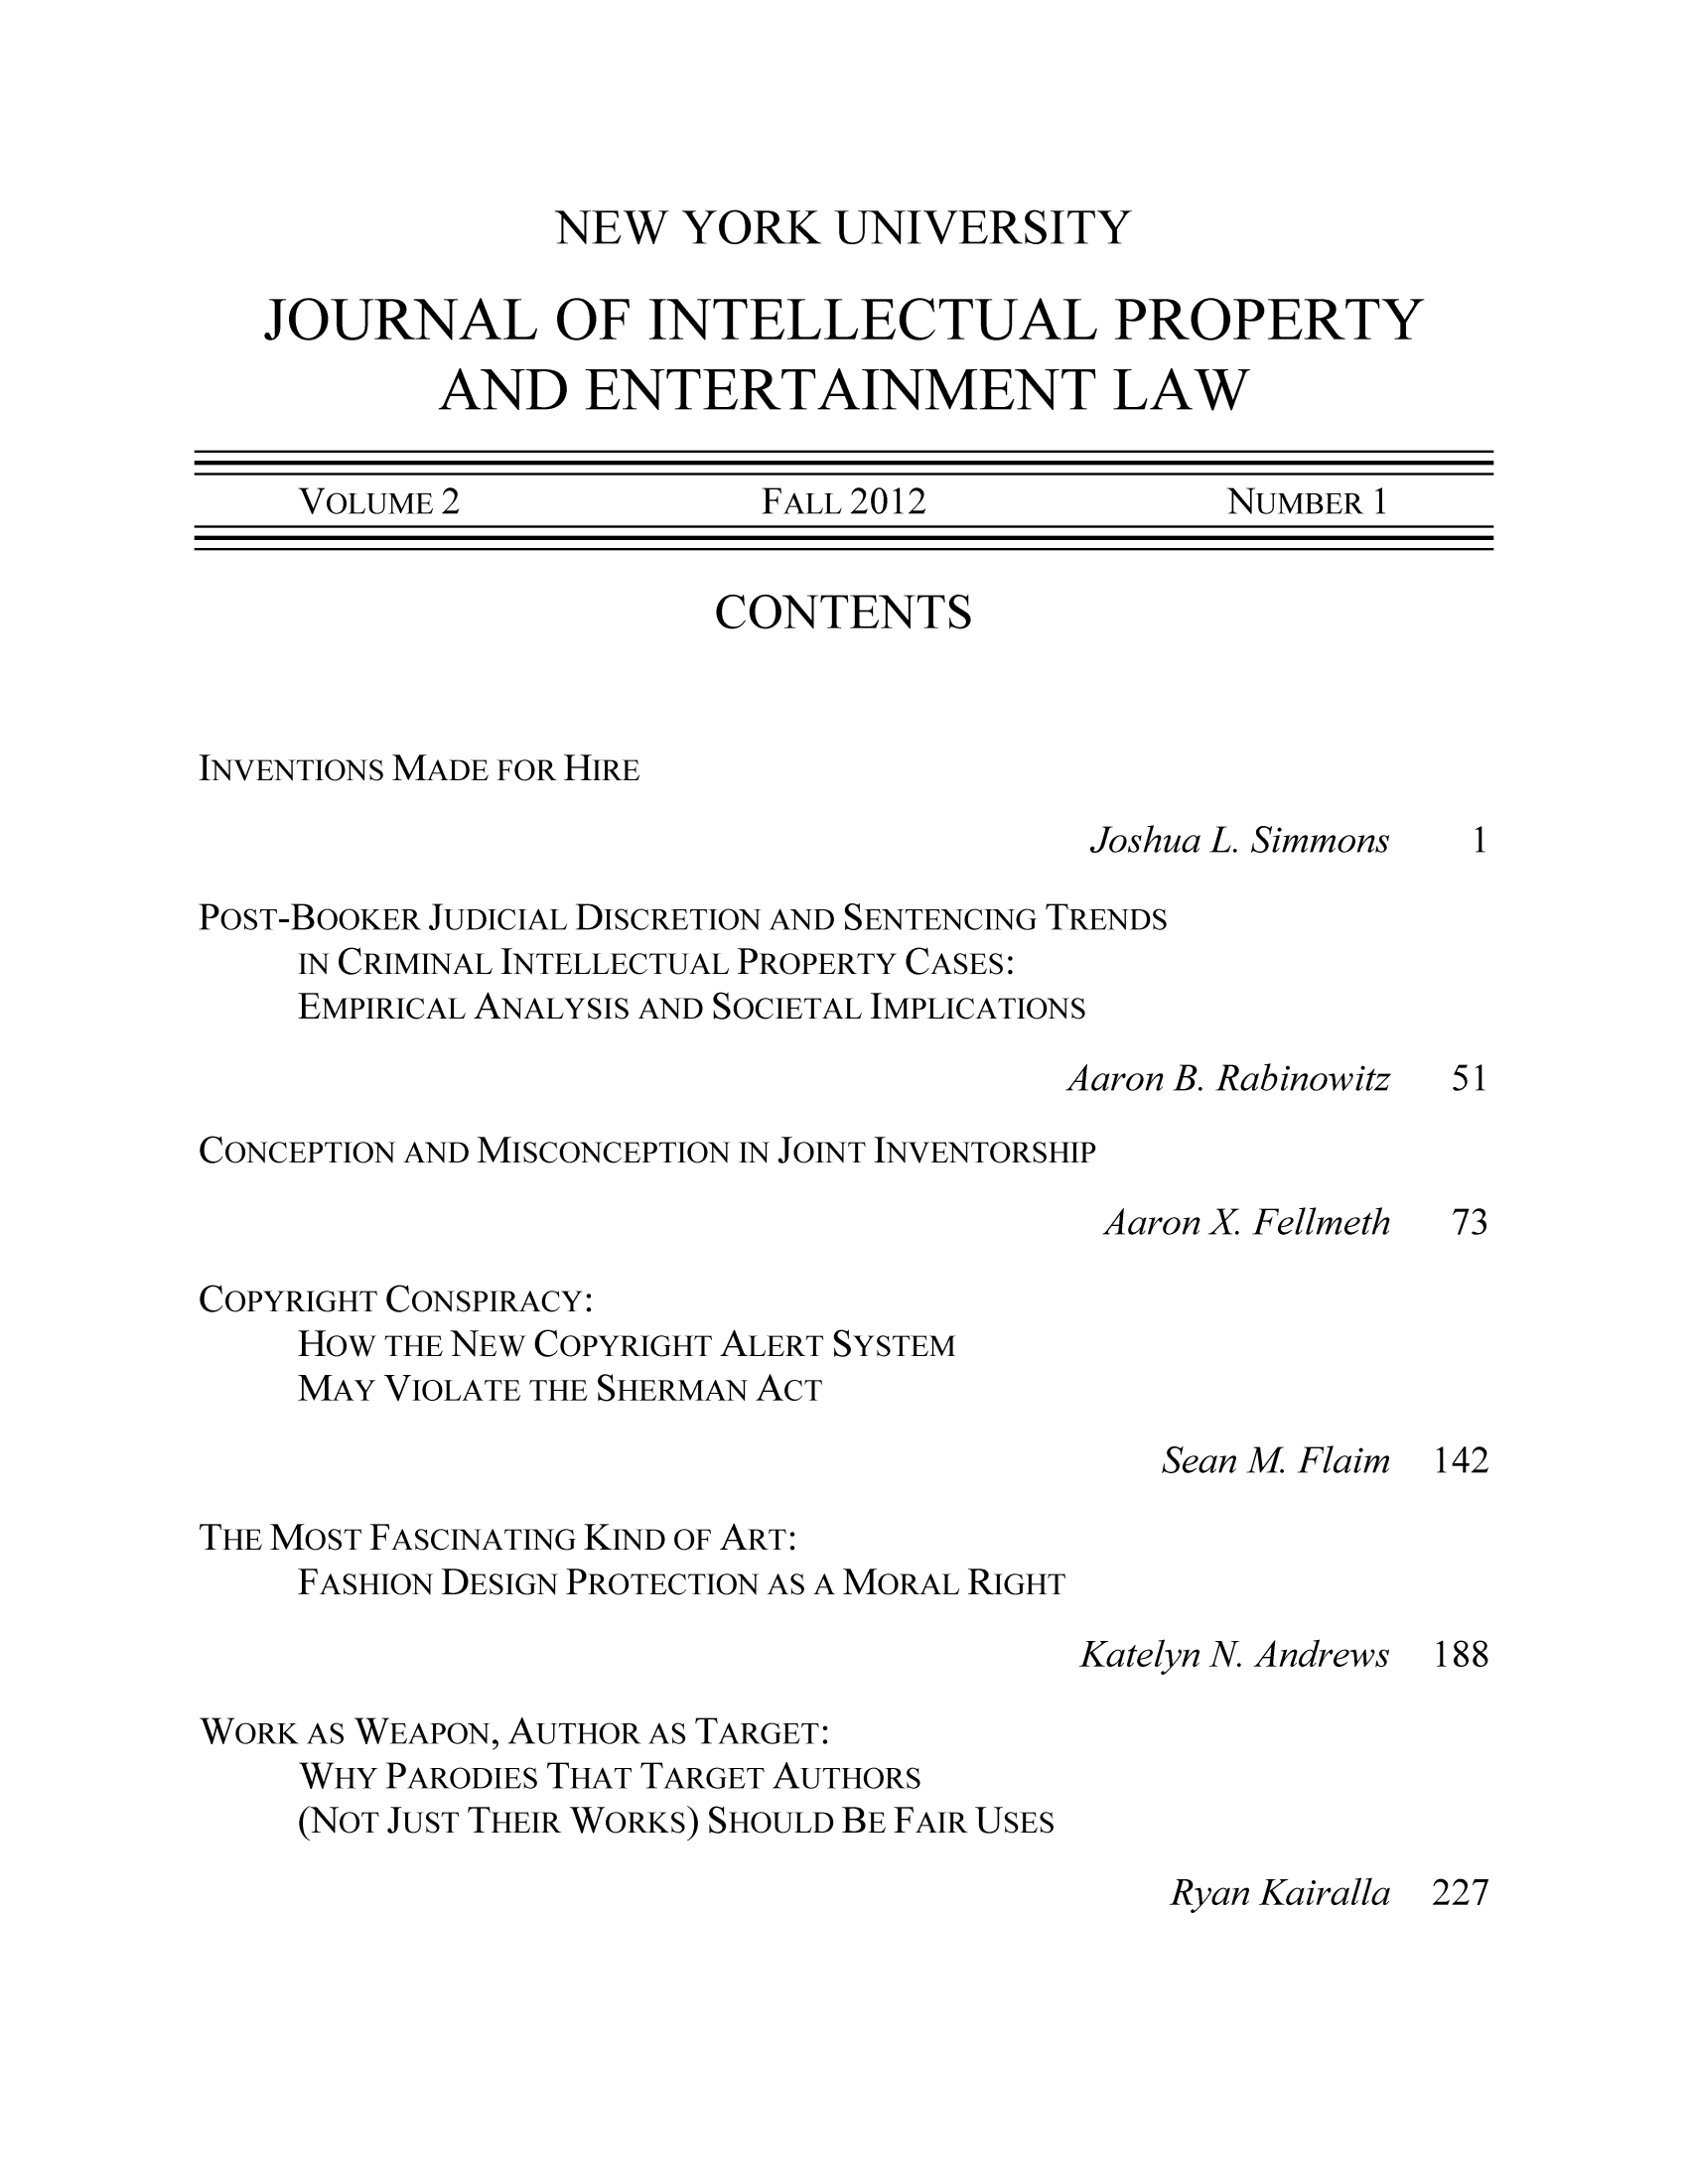 handle is hein.journals/nyuinpe2 and id is 1 raw text is: NEW YORK UNIVERSITYJOURNAL OF INTELLECTUAL PROPERTYAND ENTERTAINMENT LAWVOLUME 2               FALL 2012              NUMBER 1CONTENTSINVENTIONS MADE FOR HIREJoshua L. Simmons  1POST-BOOKER JUDICIAL DISCRETION AND SENTENCING TRENDSIN CRIMINAL INTELLECTUAL PROPERTY CASES:EMPIRICAL ANALYSIS AND SOCIETAL IMPLICATIONSAaron B. Rabinowitz  51CONCEPTION AND MISCONCEPTION IN JOINT INVENTORSHIPAaron X Fellmeth  73COPYRIGHT CONSPIRACY:HOW THE NEW COPYRIGHT ALERT SYSTEMMAY VIOLATE THE SHERMAN ACTSean M Flaim 142THE MOST FASCINATING KIND OF ART:FASHION DESIGN PROTECTION AS A MORAL RIGHTKatelyn N. Andrews 188WORK AS WEAPON, AUTHOR AS TARGET:WHY PARODIES THAT TARGET AUTHORS(NOT JUST THEIR WORKS) SHOULD BE FAIR USESRyan Kairalla 227